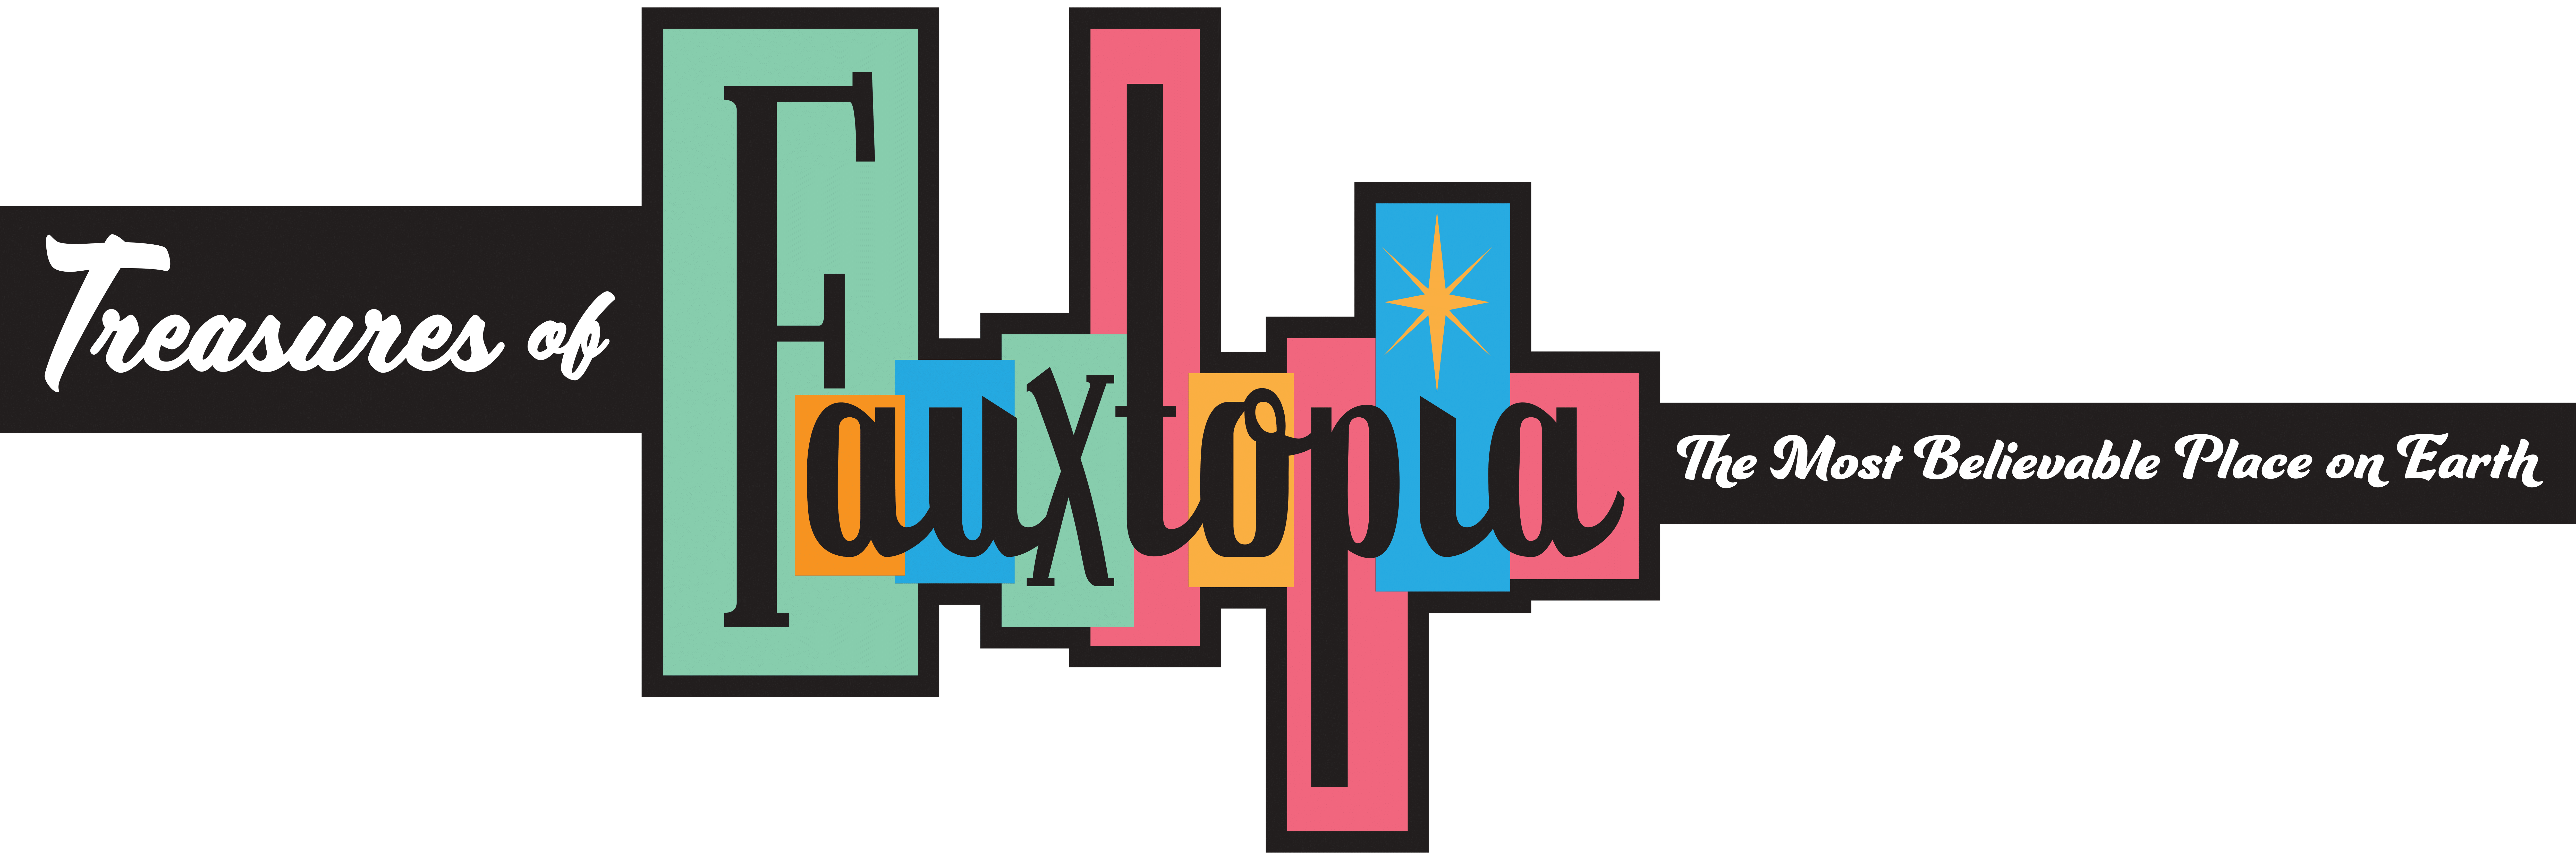 PDF version of the exhibition sign, which says "Treasures of Fauxtopia. The Most Beautiful Place on Earth." The letters of 'Fauxtopia' are backed by rectangular shapes of different colors.